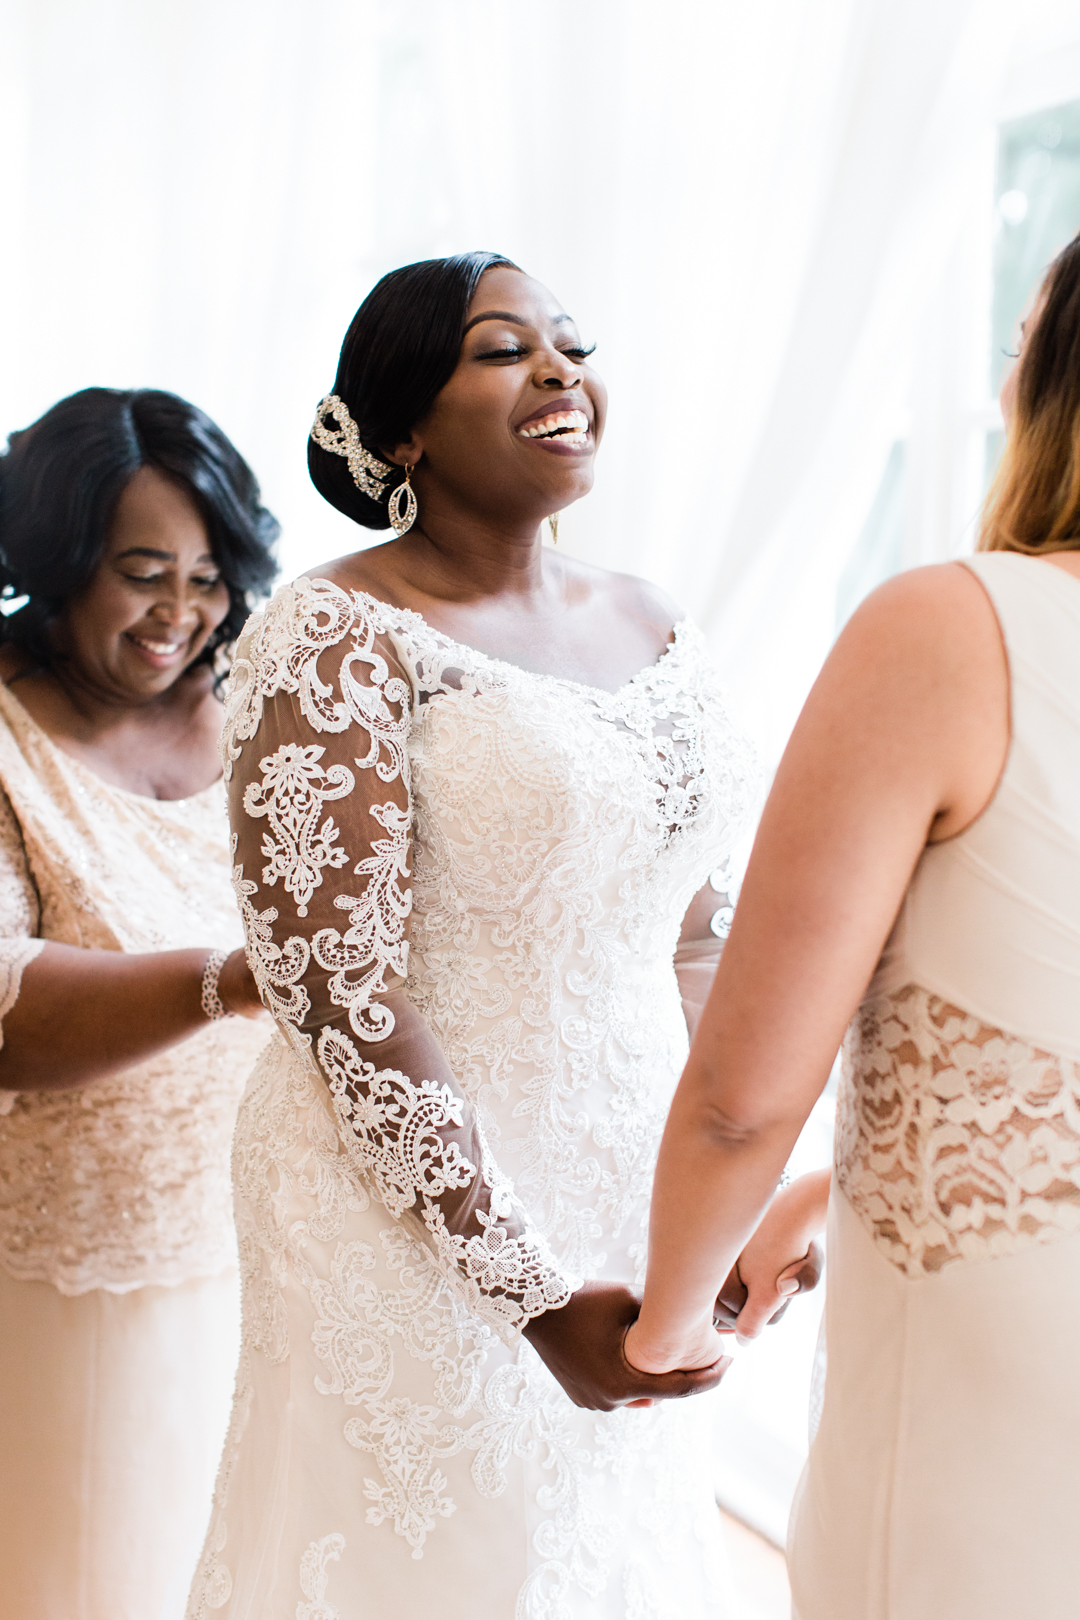 Bridal BLISS while getting ready at The Estate in Atlanta